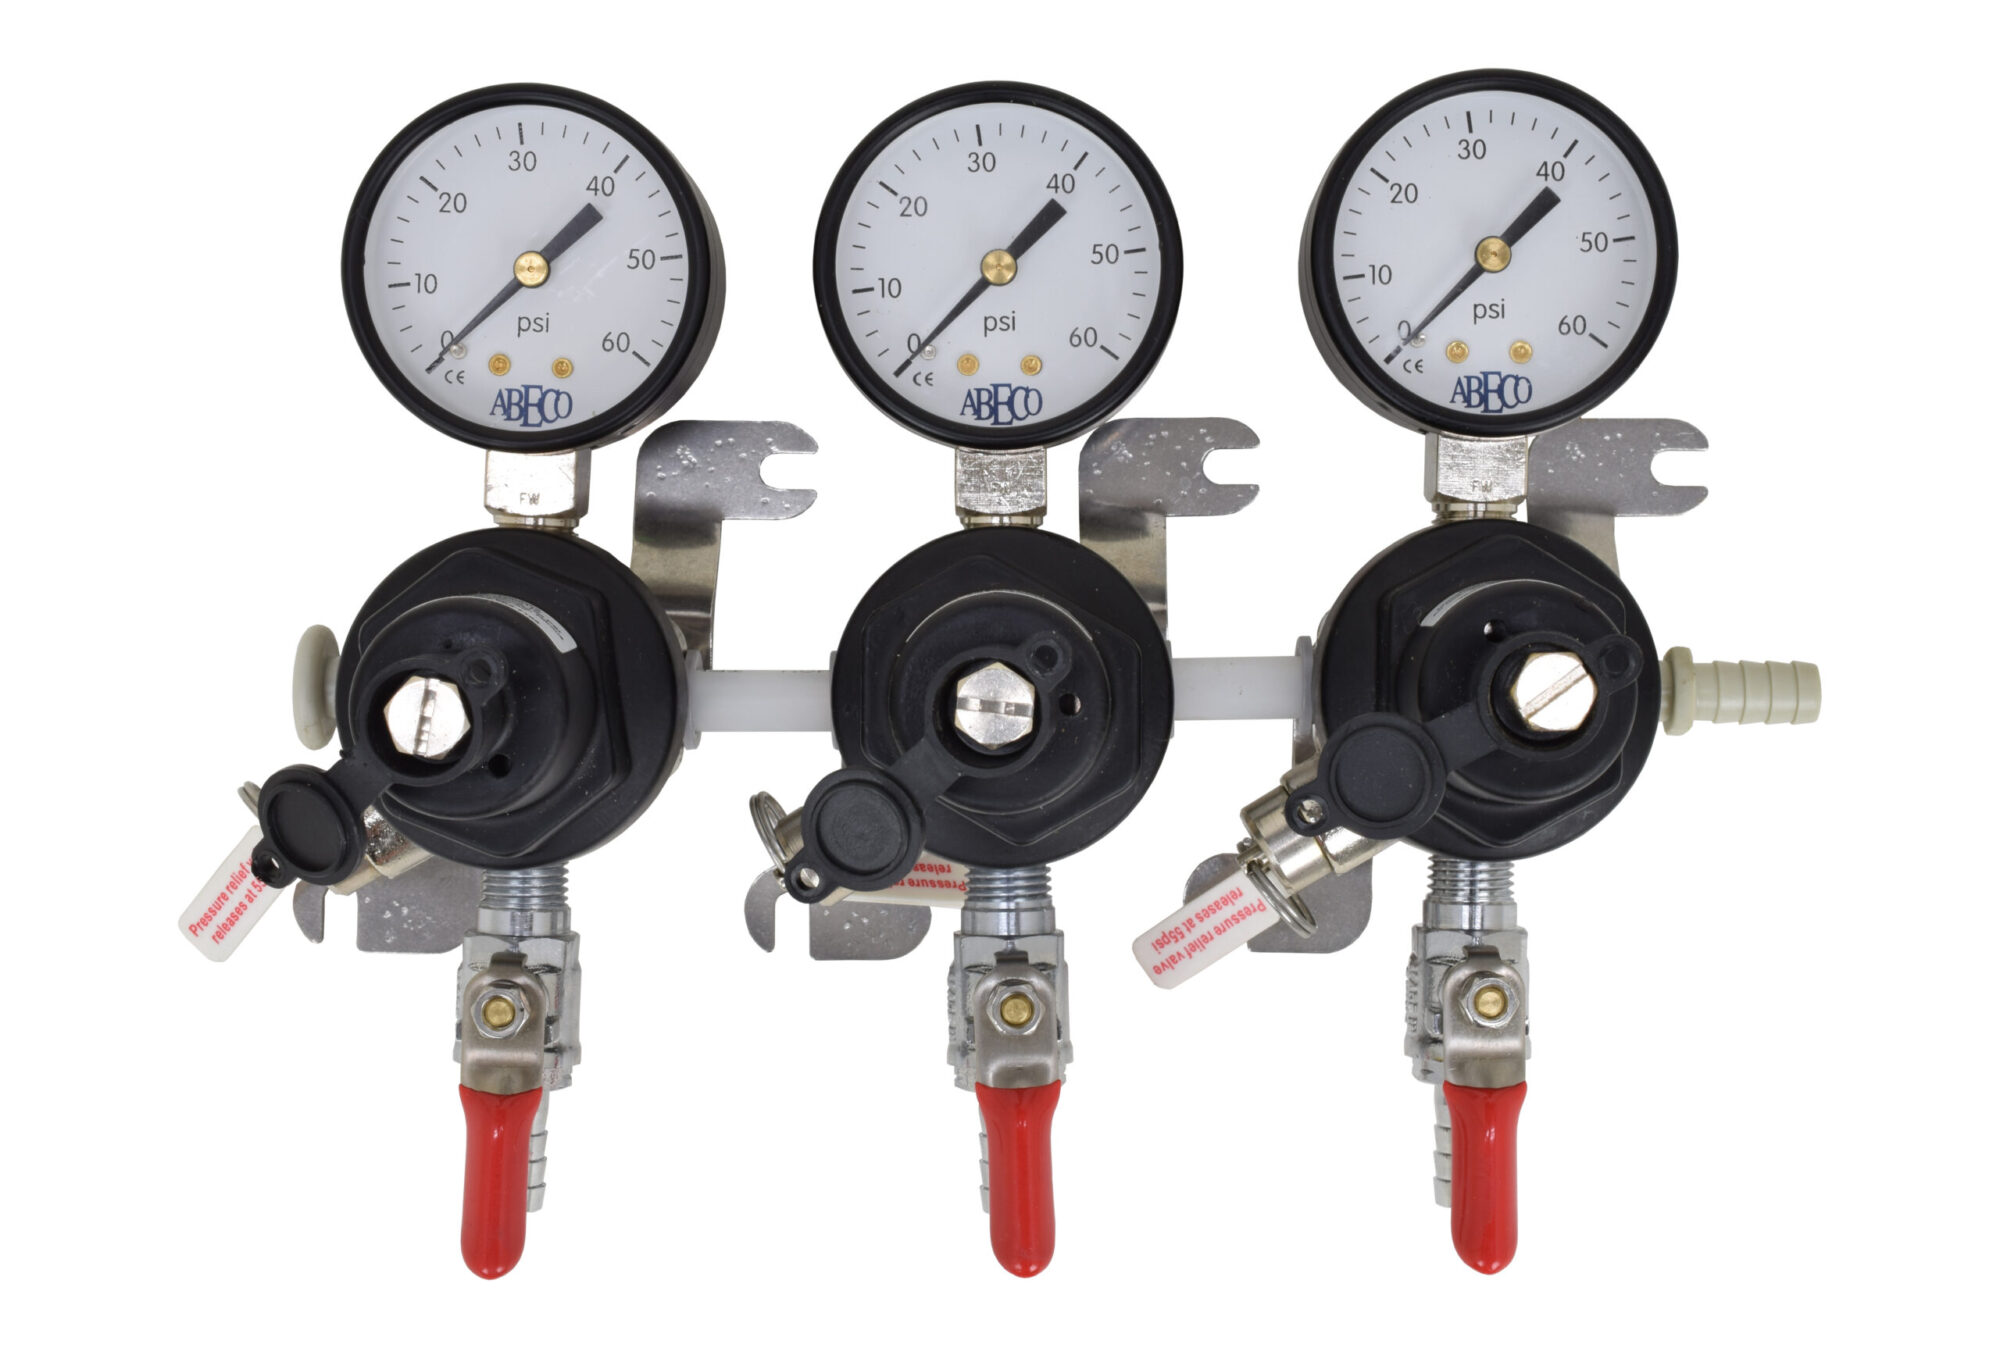 2703 Three TecFlo Secondary Regulator With Your Choice of Push In Fittings and 3/8" OD Poly Unions